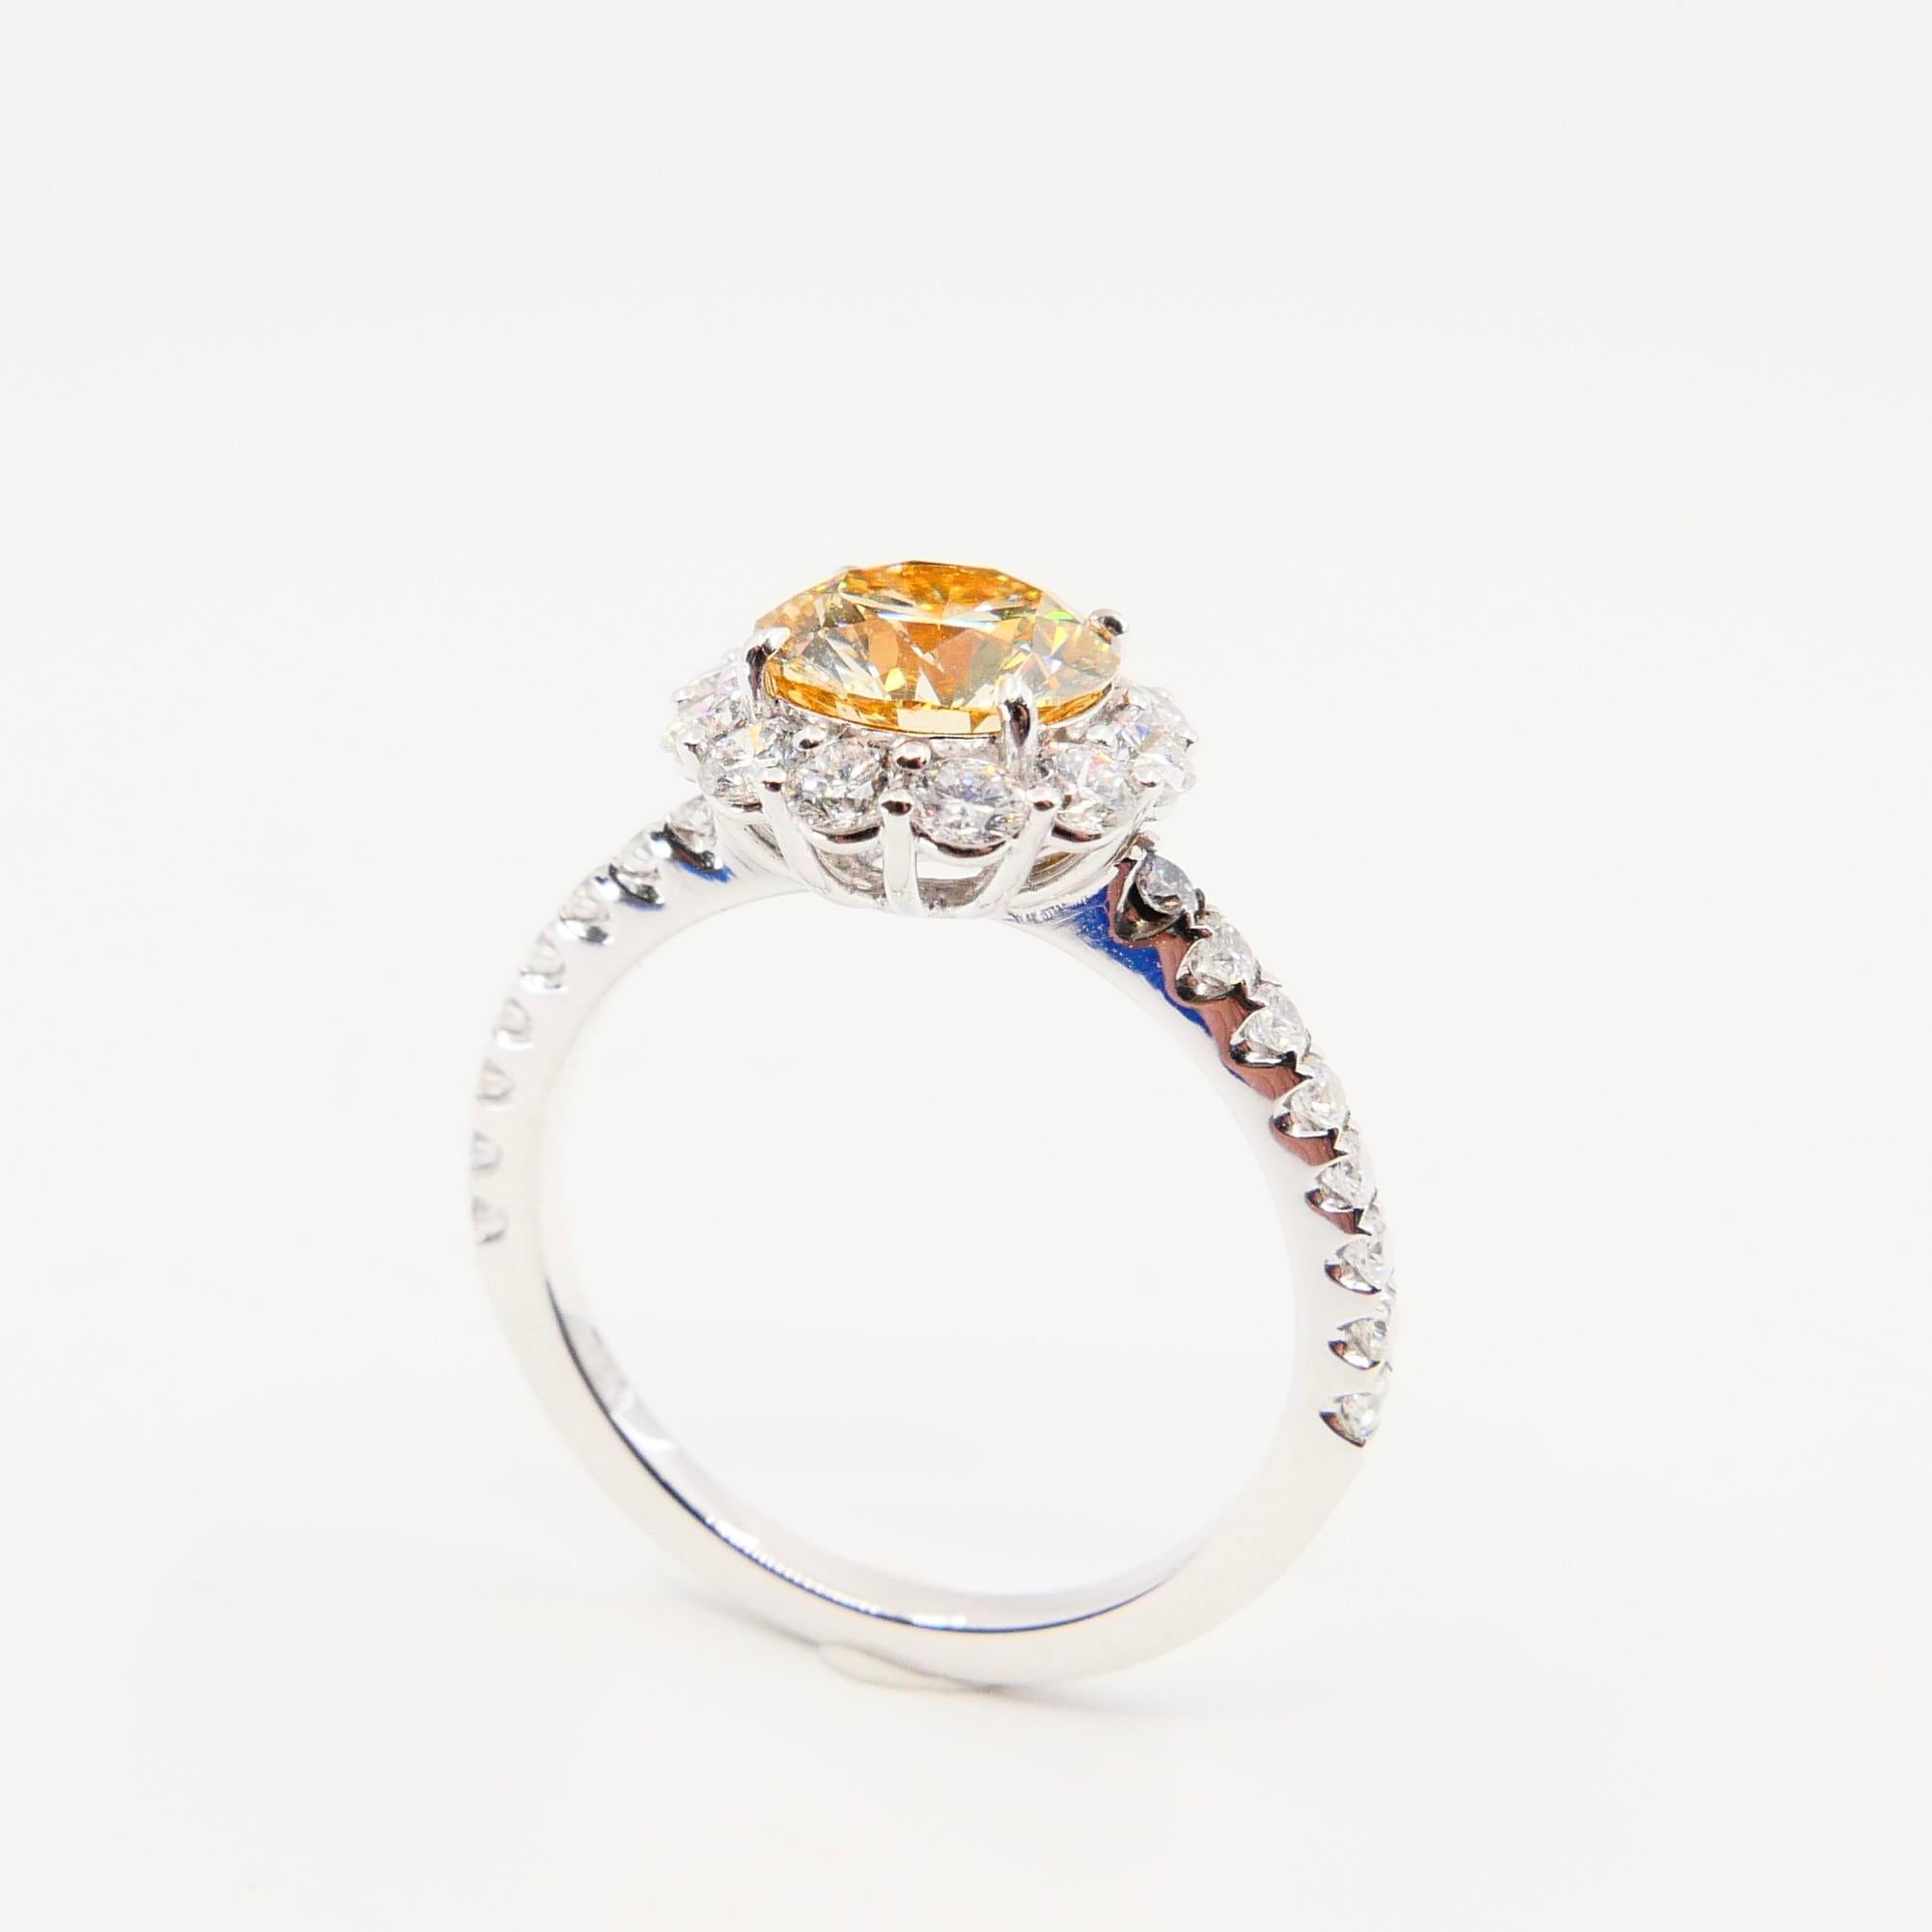 GIA Certified 1.23 Fancy Light Brownish Yellow Diamond Cocktail Ring VS2 Clarity 2